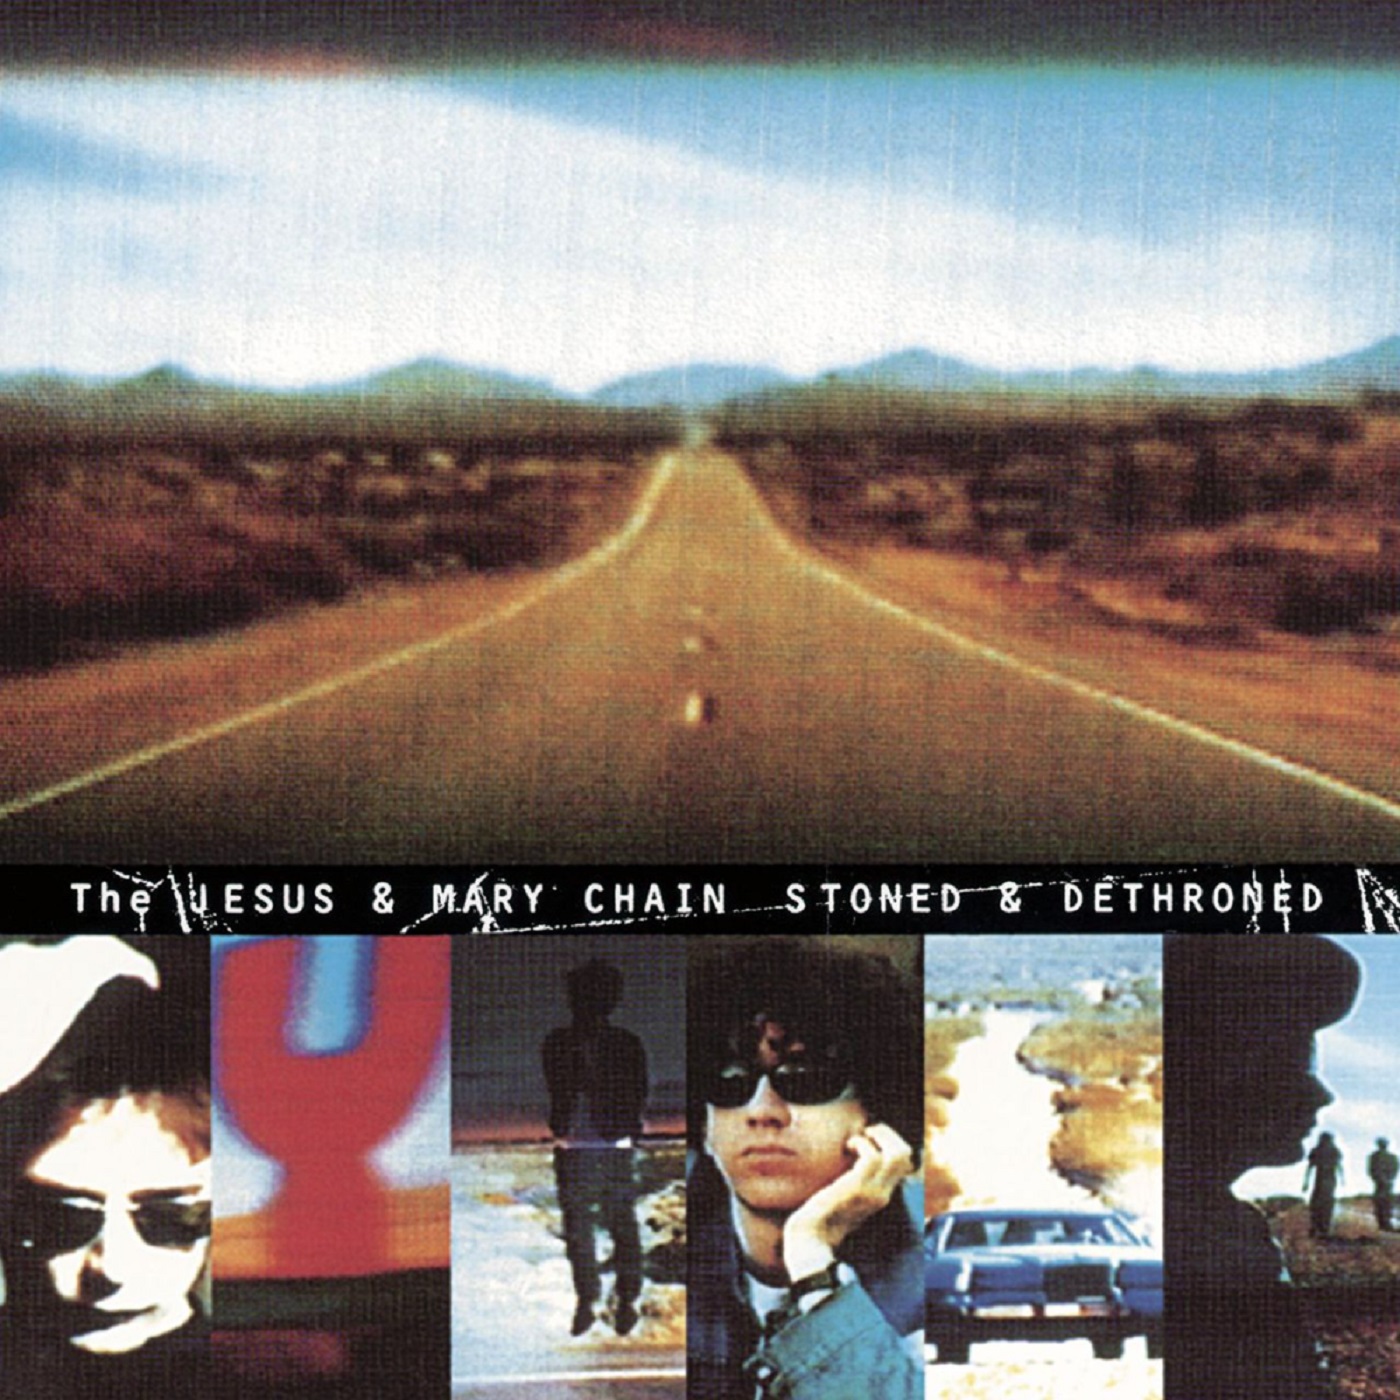 The Jesus and Mary Chain’s “Stoned and Dethroned” (with Jonathan Snyder)